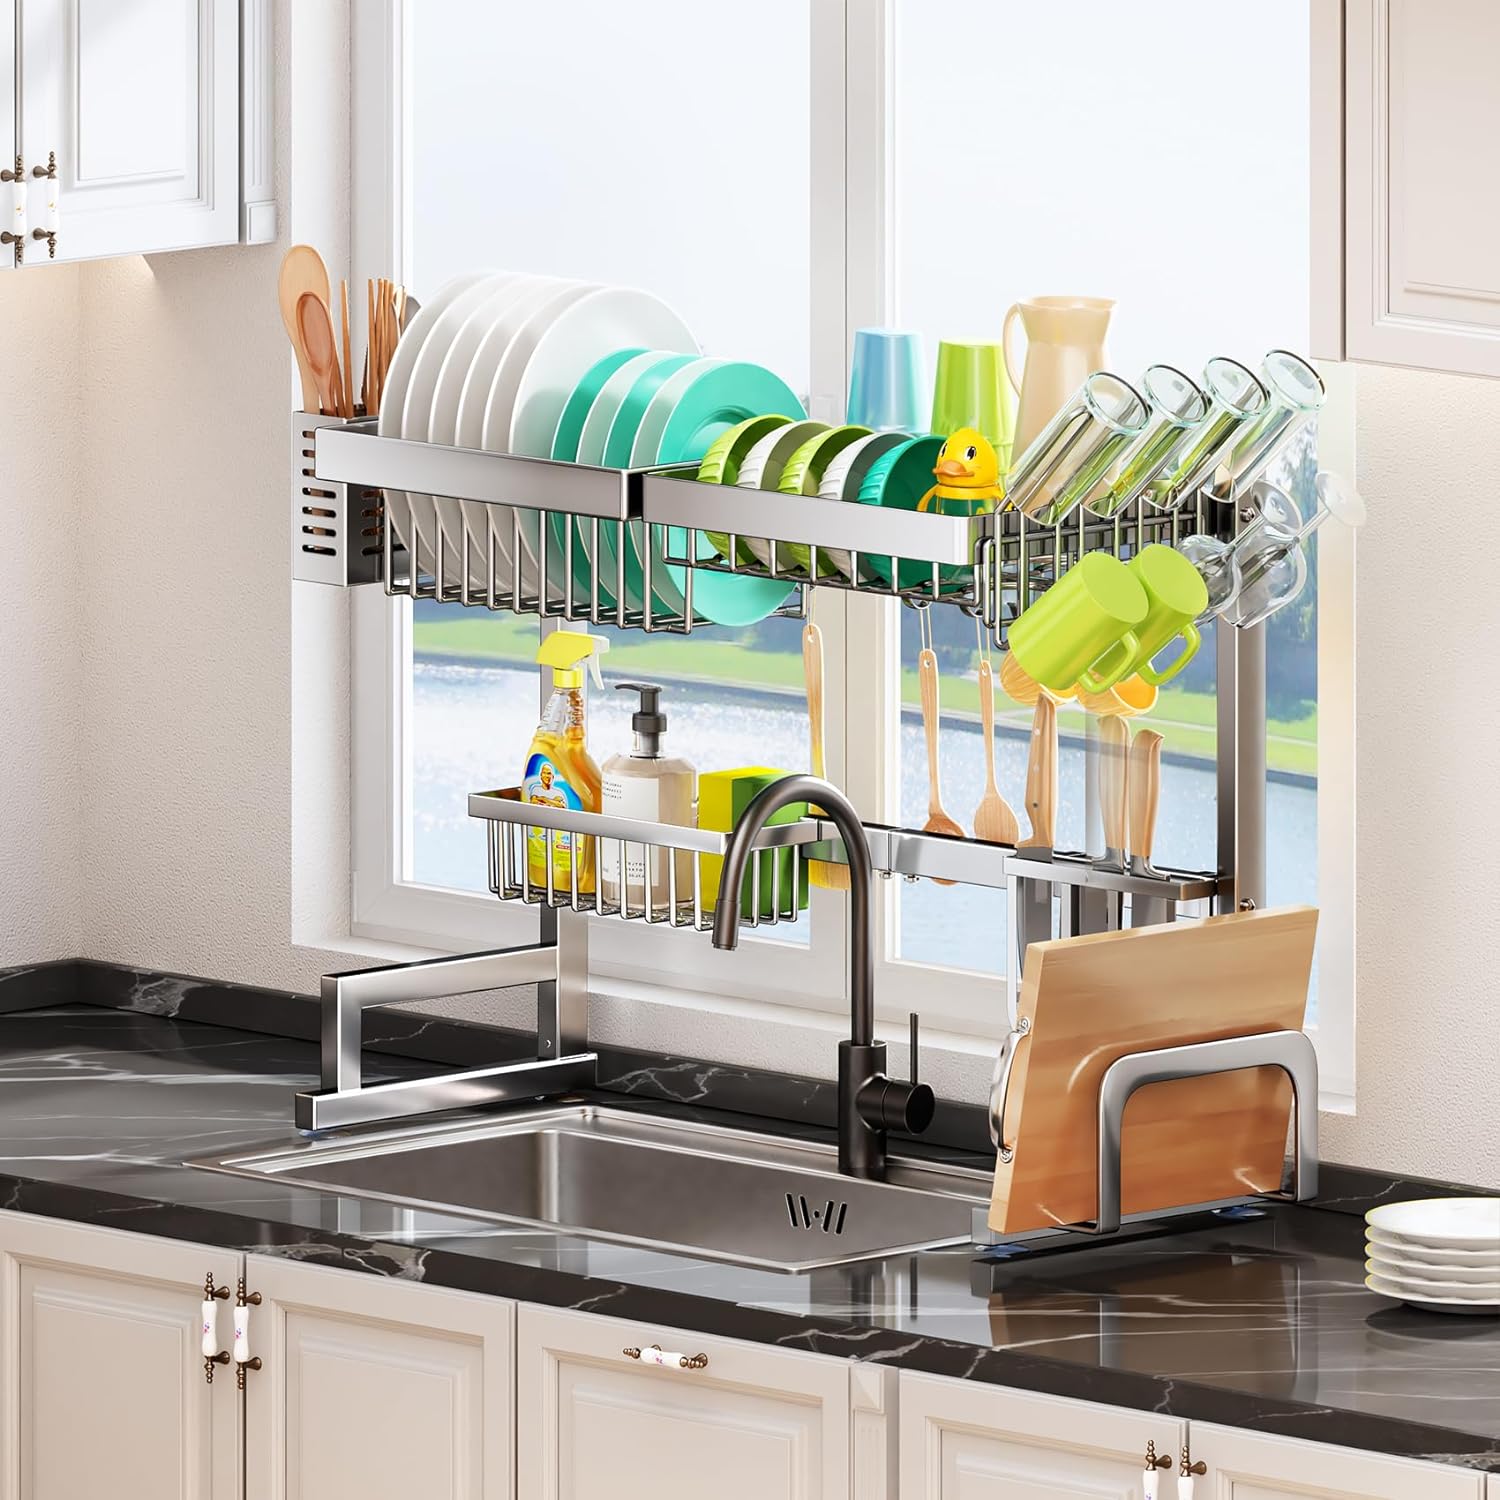 https://bigbigmart.com/wp-content/uploads/2023/10/Over-The-Sink-Dish-Drying-Rack-Full-Stainless-Steel-Adjustable-26.8-to-34.6-Large-Dish-Drying-Rack-for-Kitchen-Counter-with-Multiple-Baskets-Utensil-Sponge-Holder-Sink-Caddy-2-Tier-Silver6.jpg